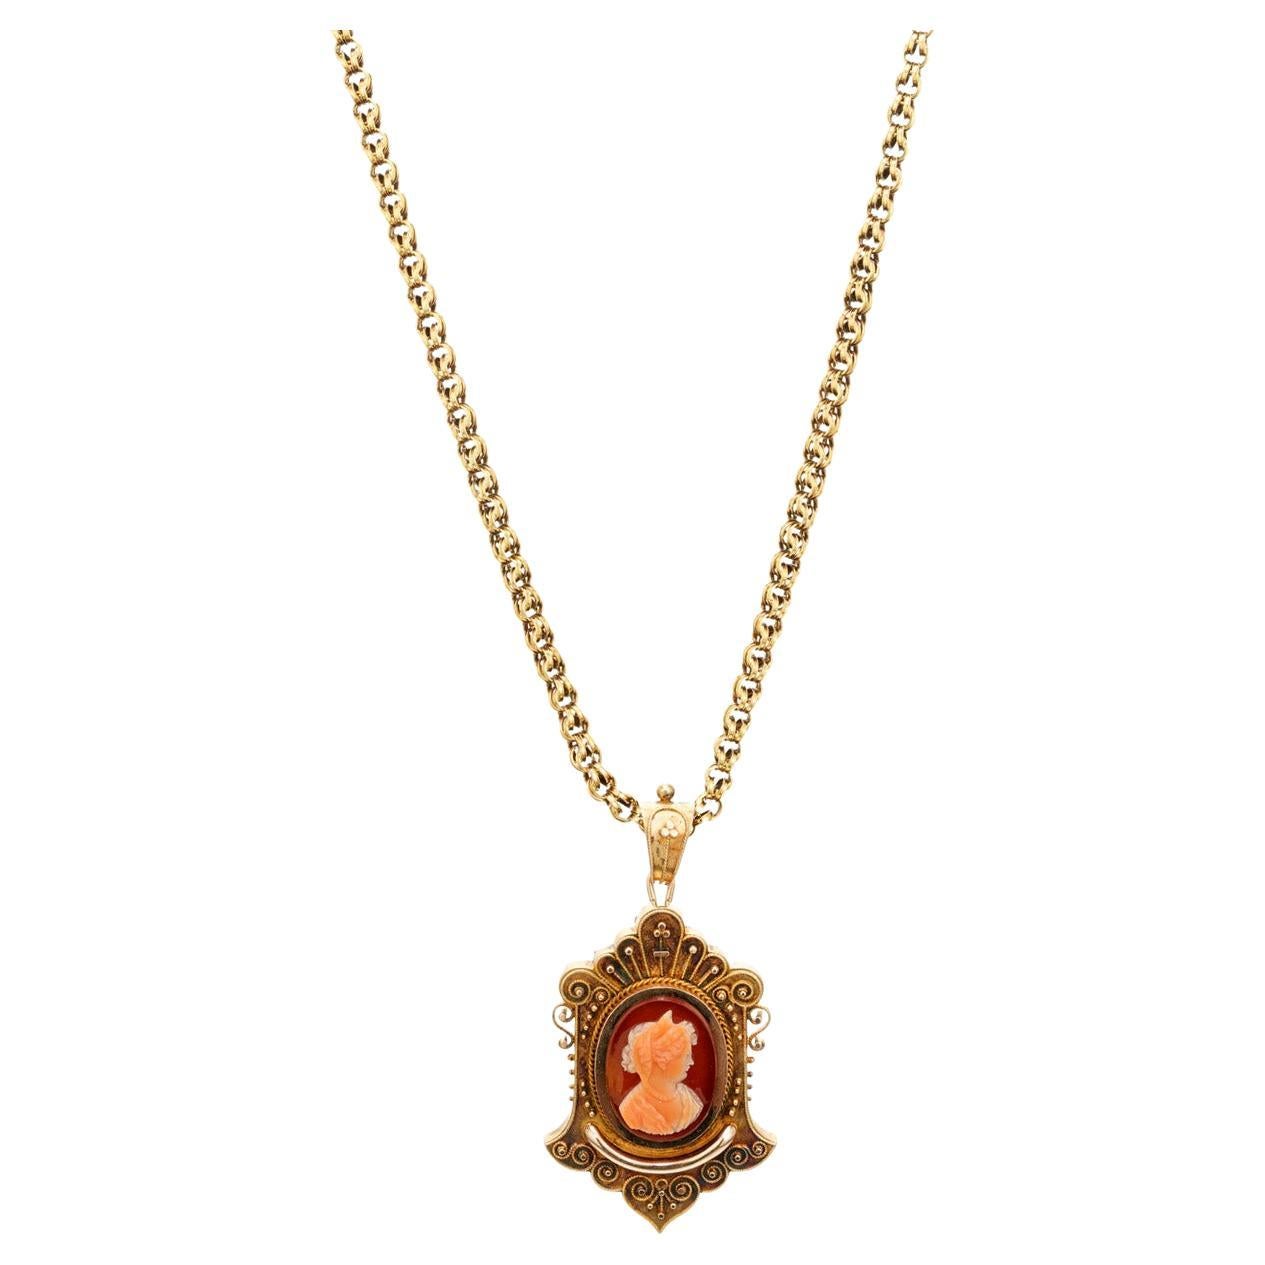 Victorian 1845 Carnelian Hardstone Yellow Gold Cameo Brooch Pendant Necklace For Sale